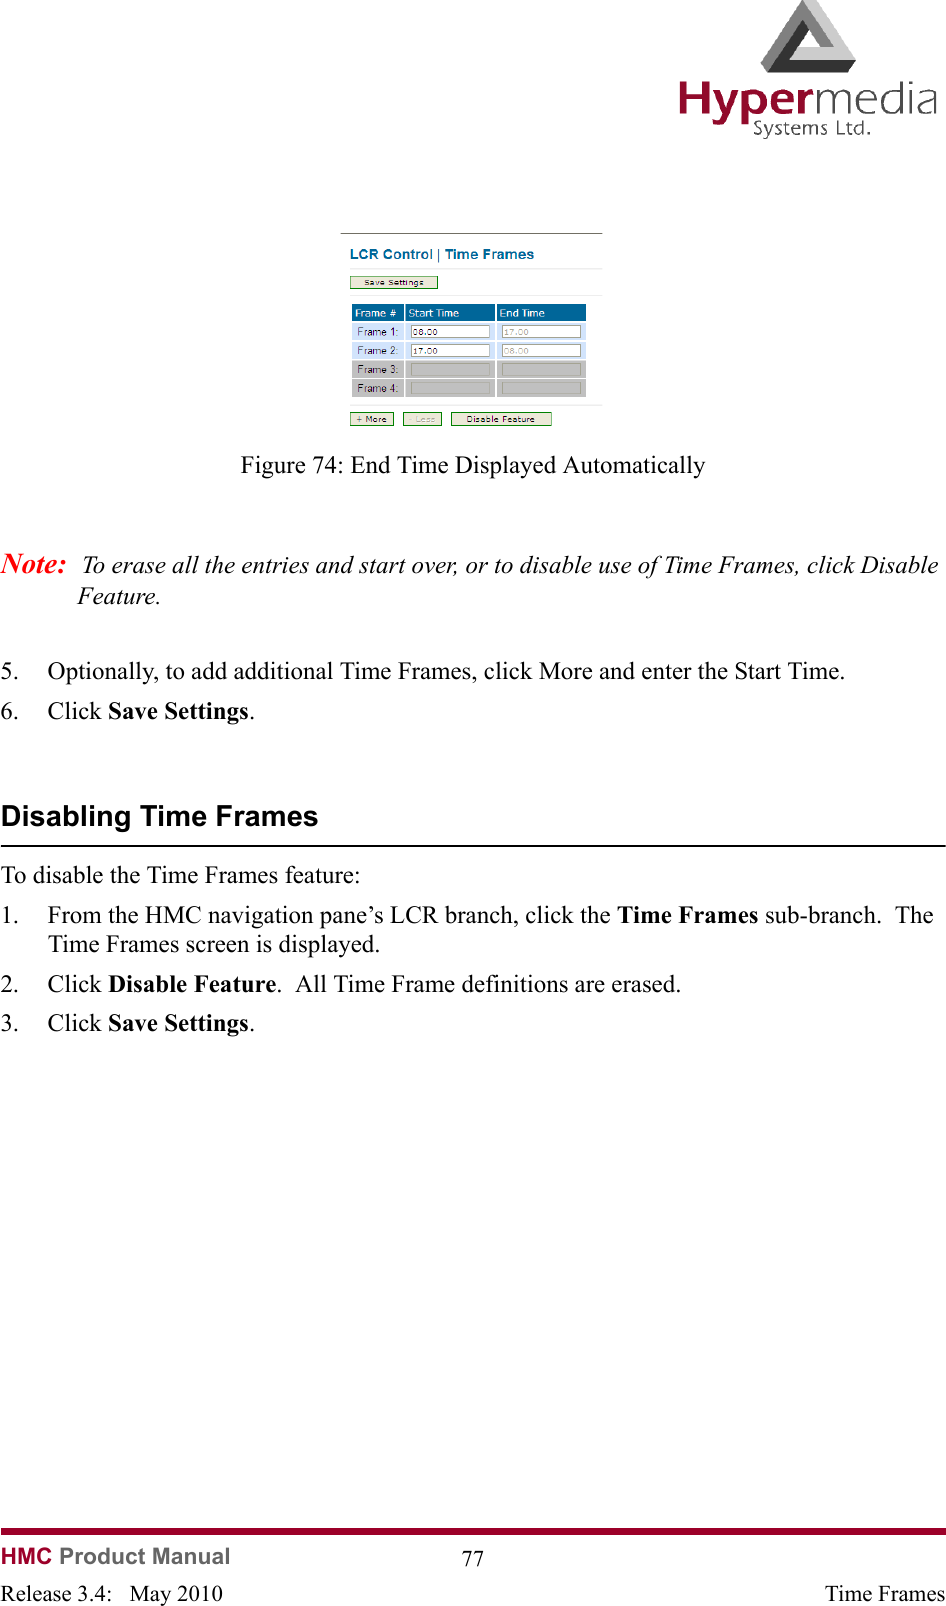 HMC Product Manual  77Release 3.4:   May 2010 Time Frames              Figure 74: End Time Displayed AutomaticallyNote:  To erase all the entries and start over, or to disable use of Time Frames, click Disable Feature.5. Optionally, to add additional Time Frames, click More and enter the Start Time.6. Click Save Settings.Disabling Time FramesTo disable the Time Frames feature:1. From the HMC navigation pane’s LCR branch, click the Time Frames sub-branch.  The Time Frames screen is displayed.2. Click Disable Feature.  All Time Frame definitions are erased.3. Click Save Settings.